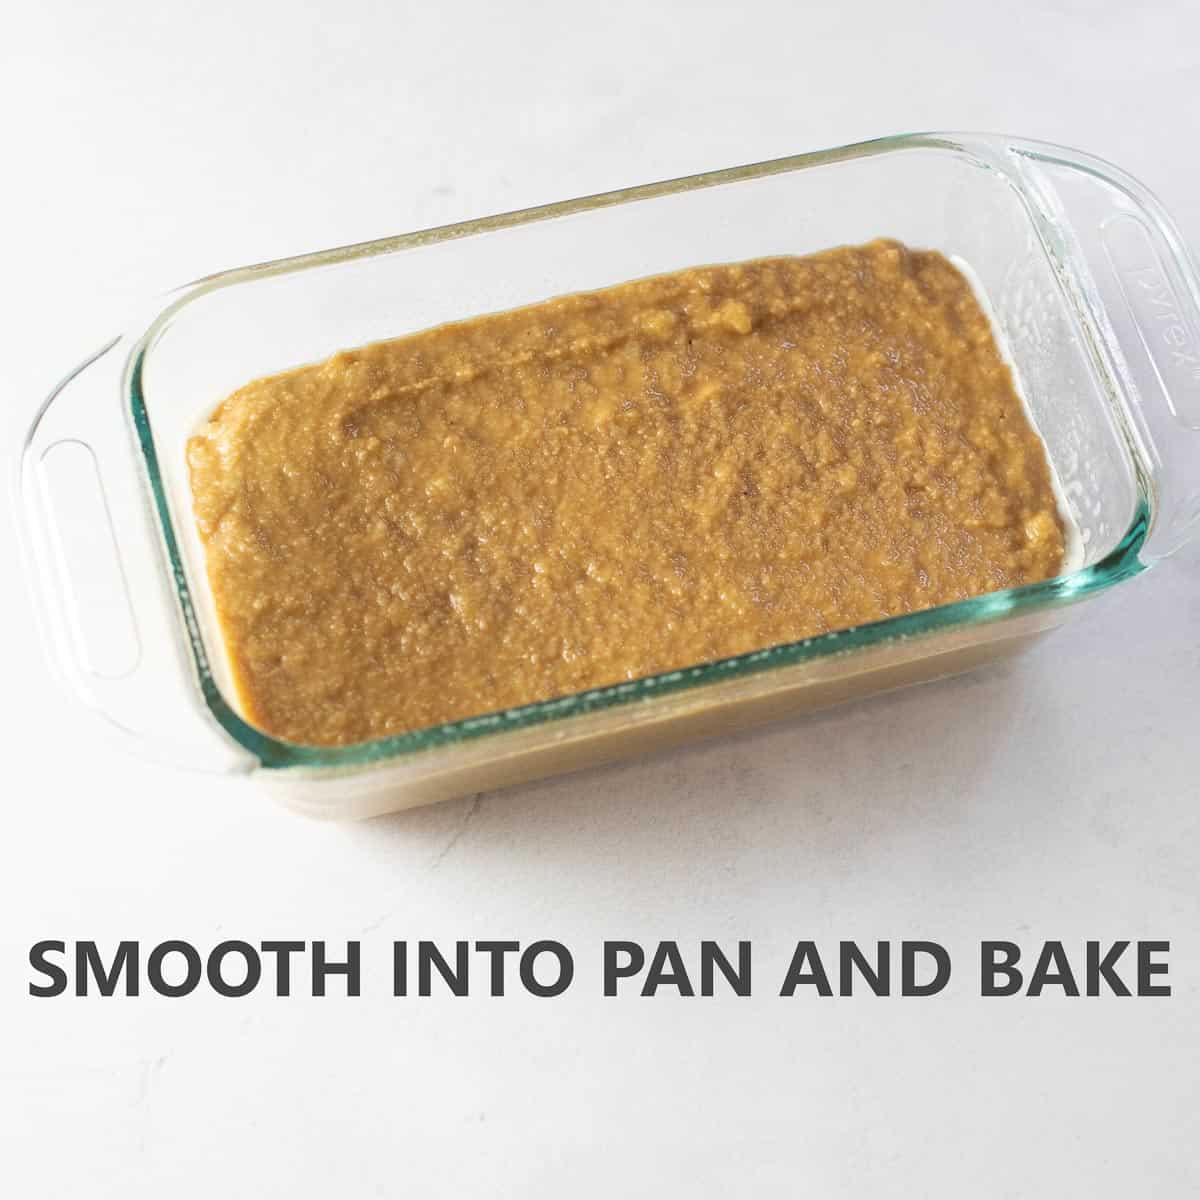 titled photo of step by step recipe for quick bread: "smooth into pan and bake"